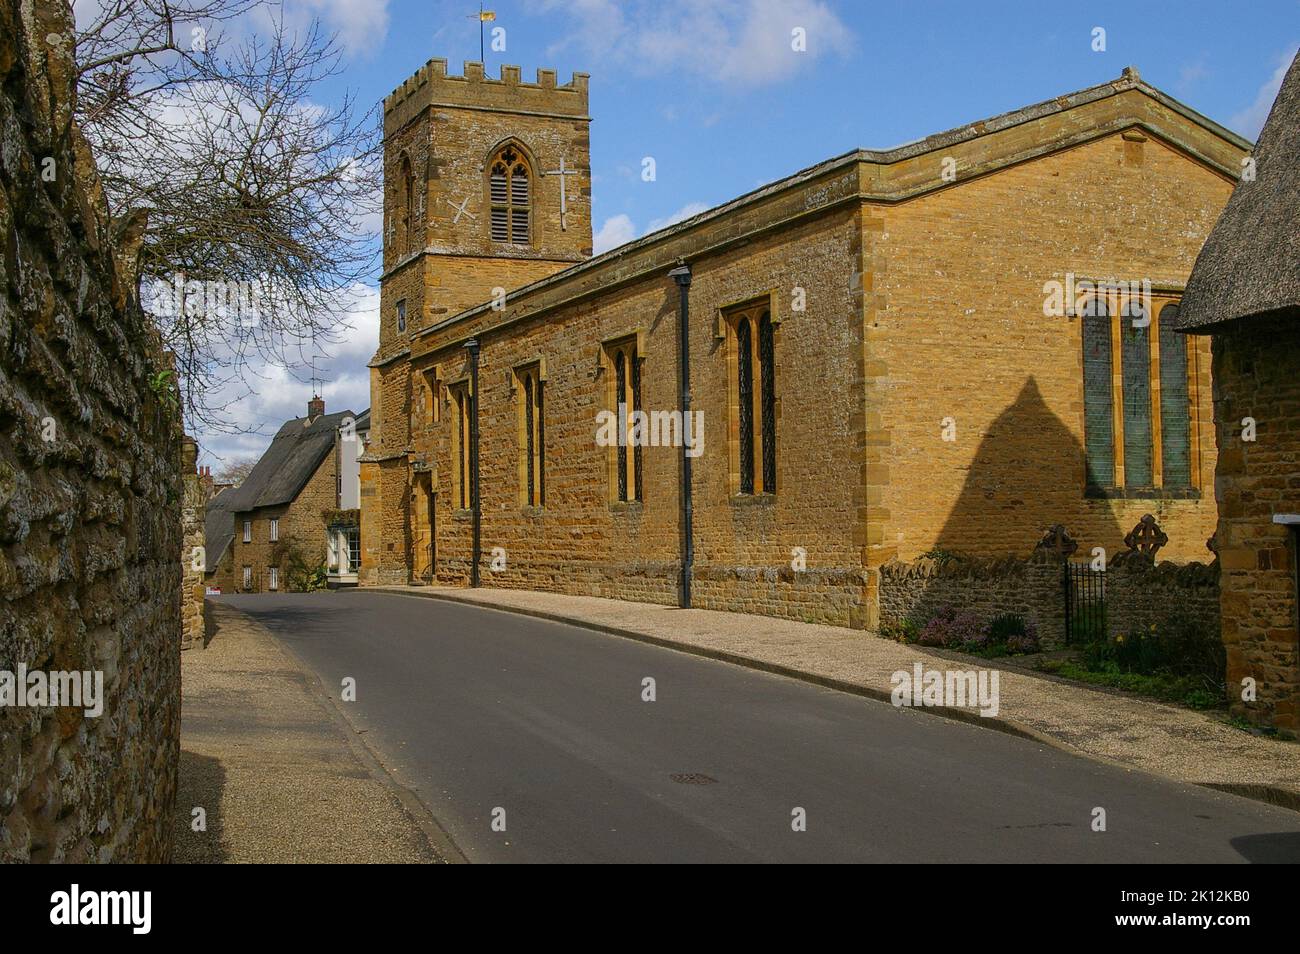 The church of St John Baptist in the village of Boughton, Northamptonshire, UK; earliest parts date from 16th century Stock Photo